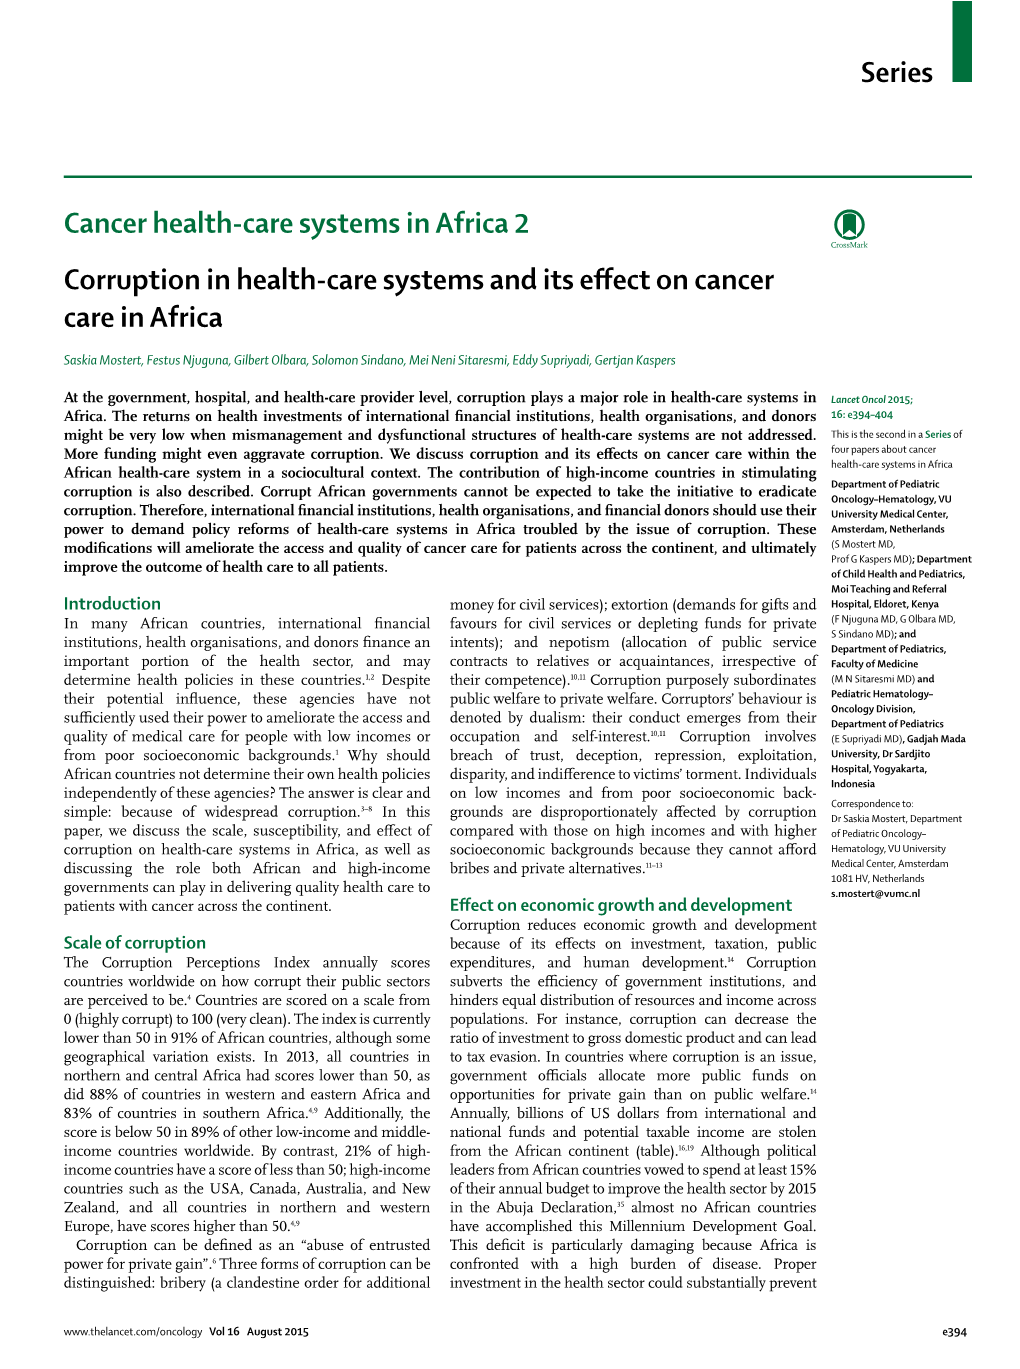 Corruption in Health-Care Systems and Its Effect on Cancer Care in Africa